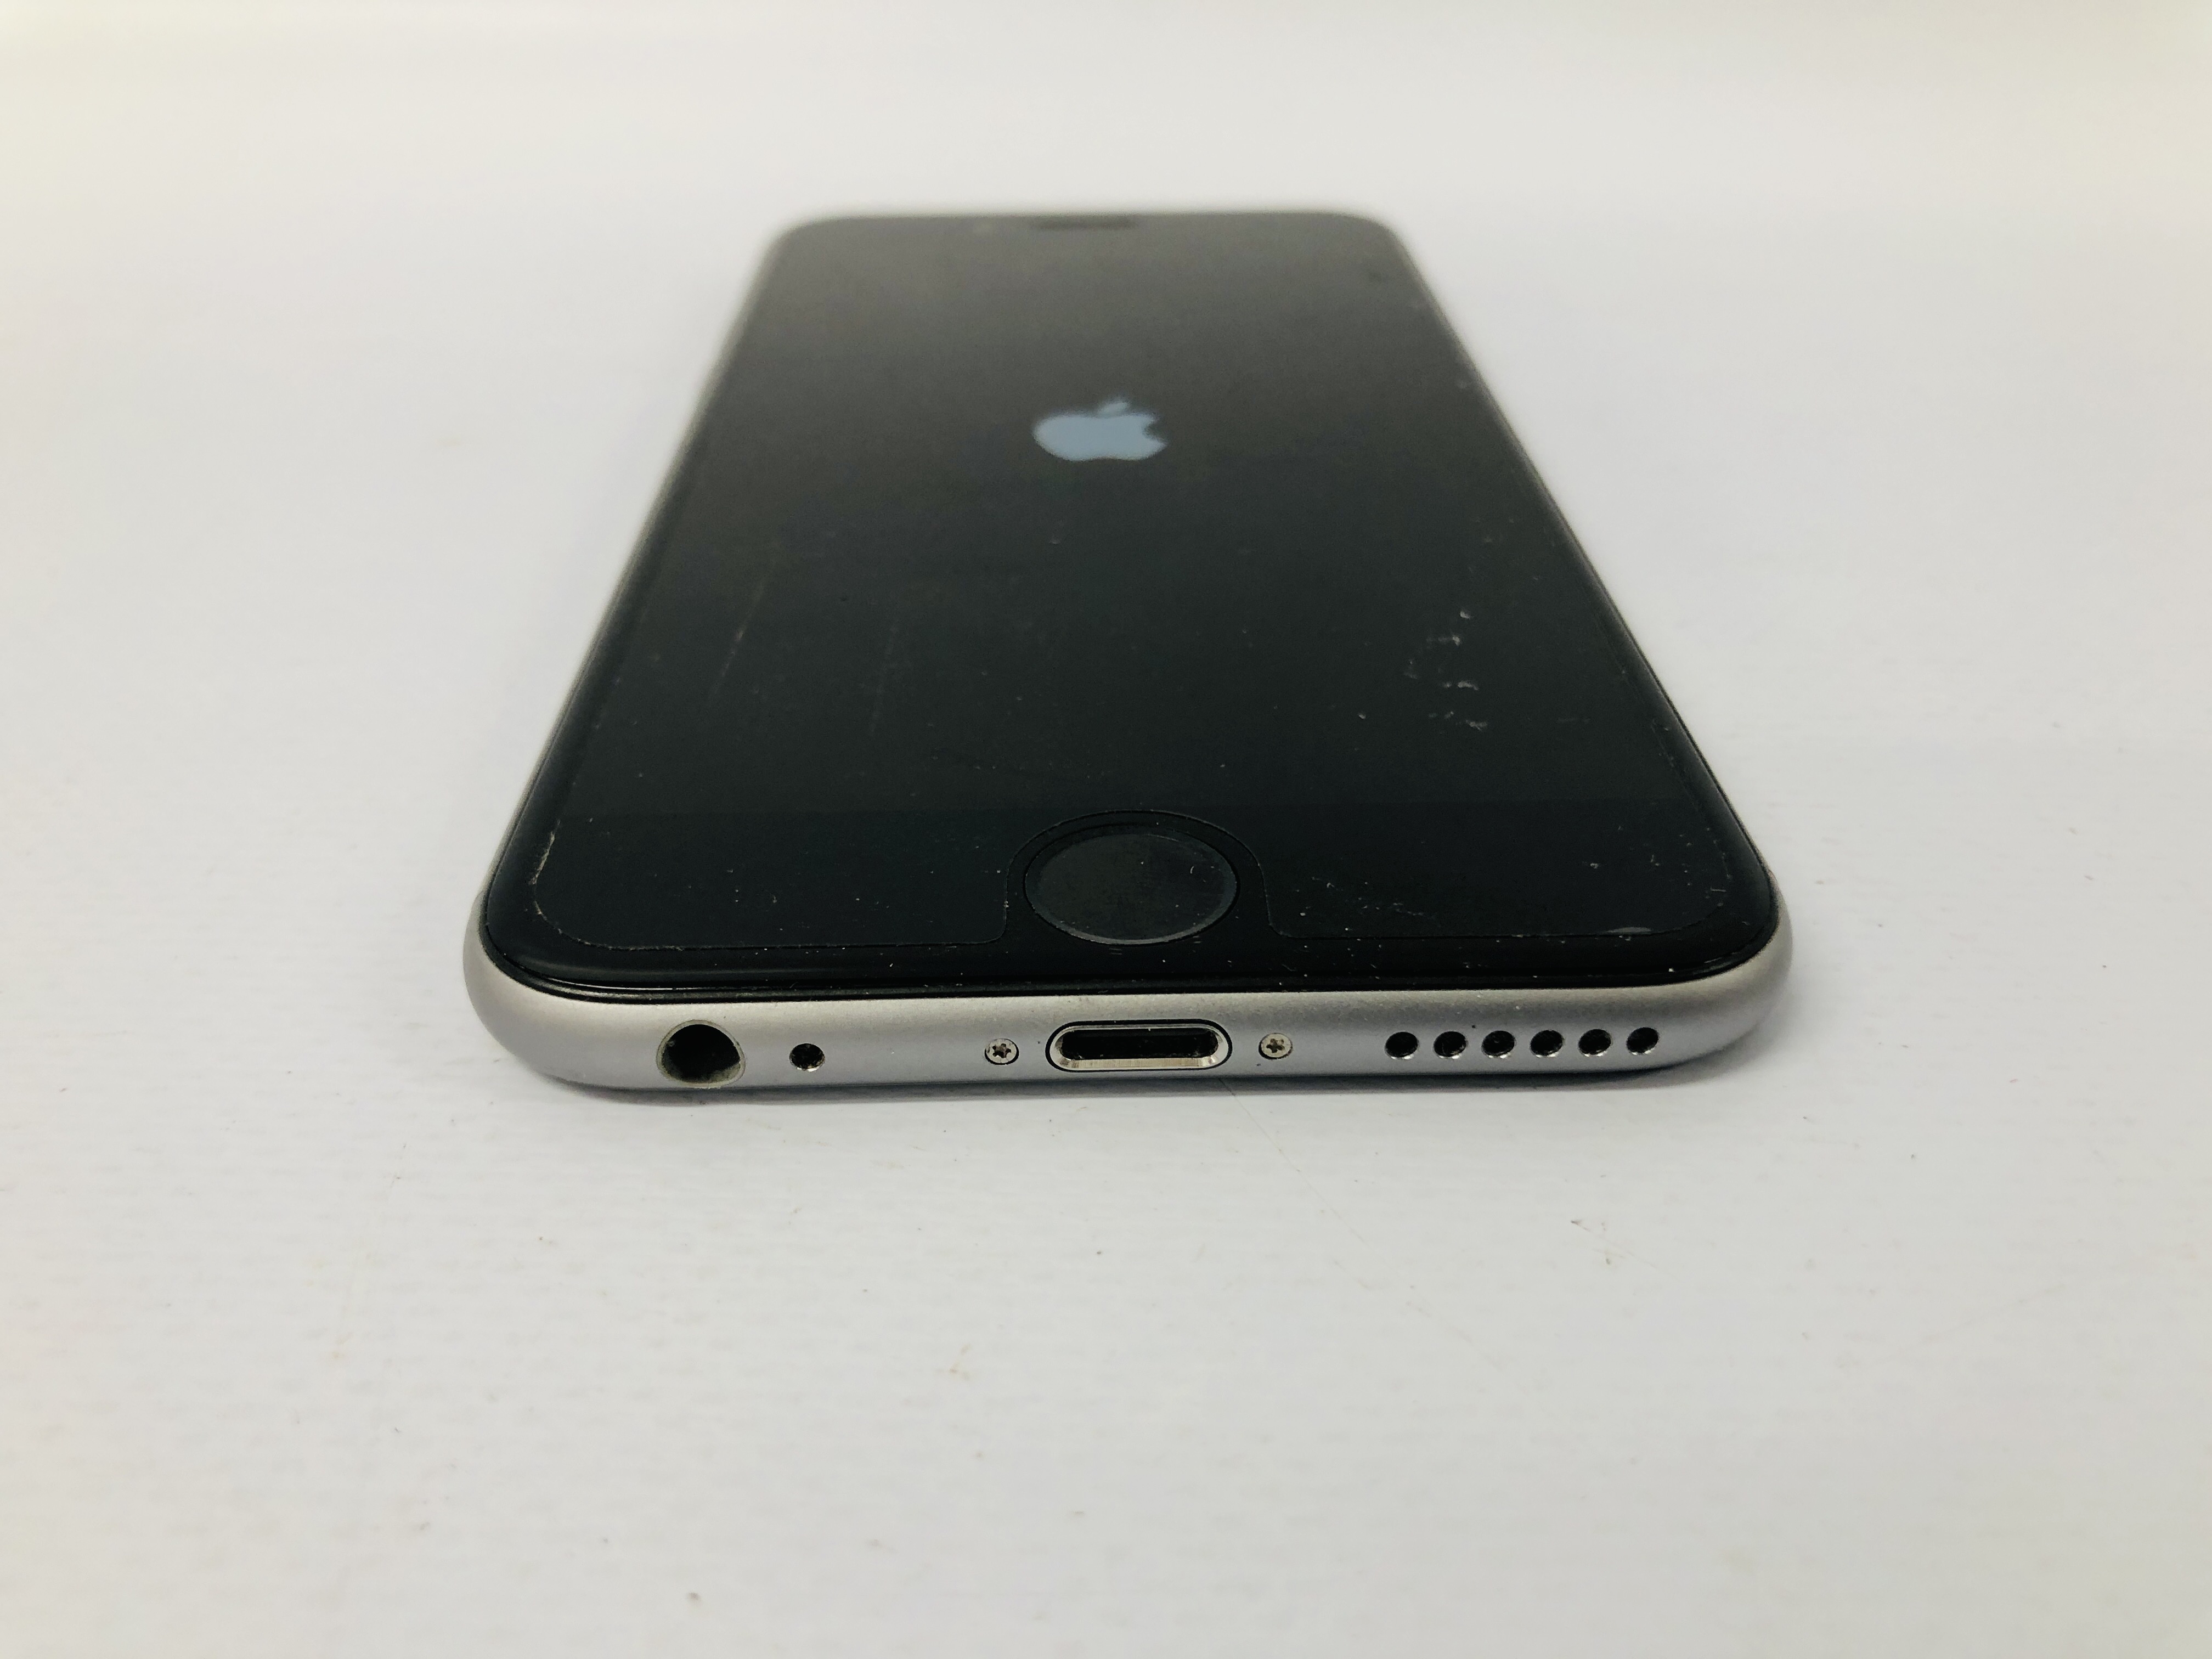 APPLE IPHONE 6 32GB - NO GUARANTEE OF CONNECTIVITY. SOLD AS SEEN. - Image 2 of 6